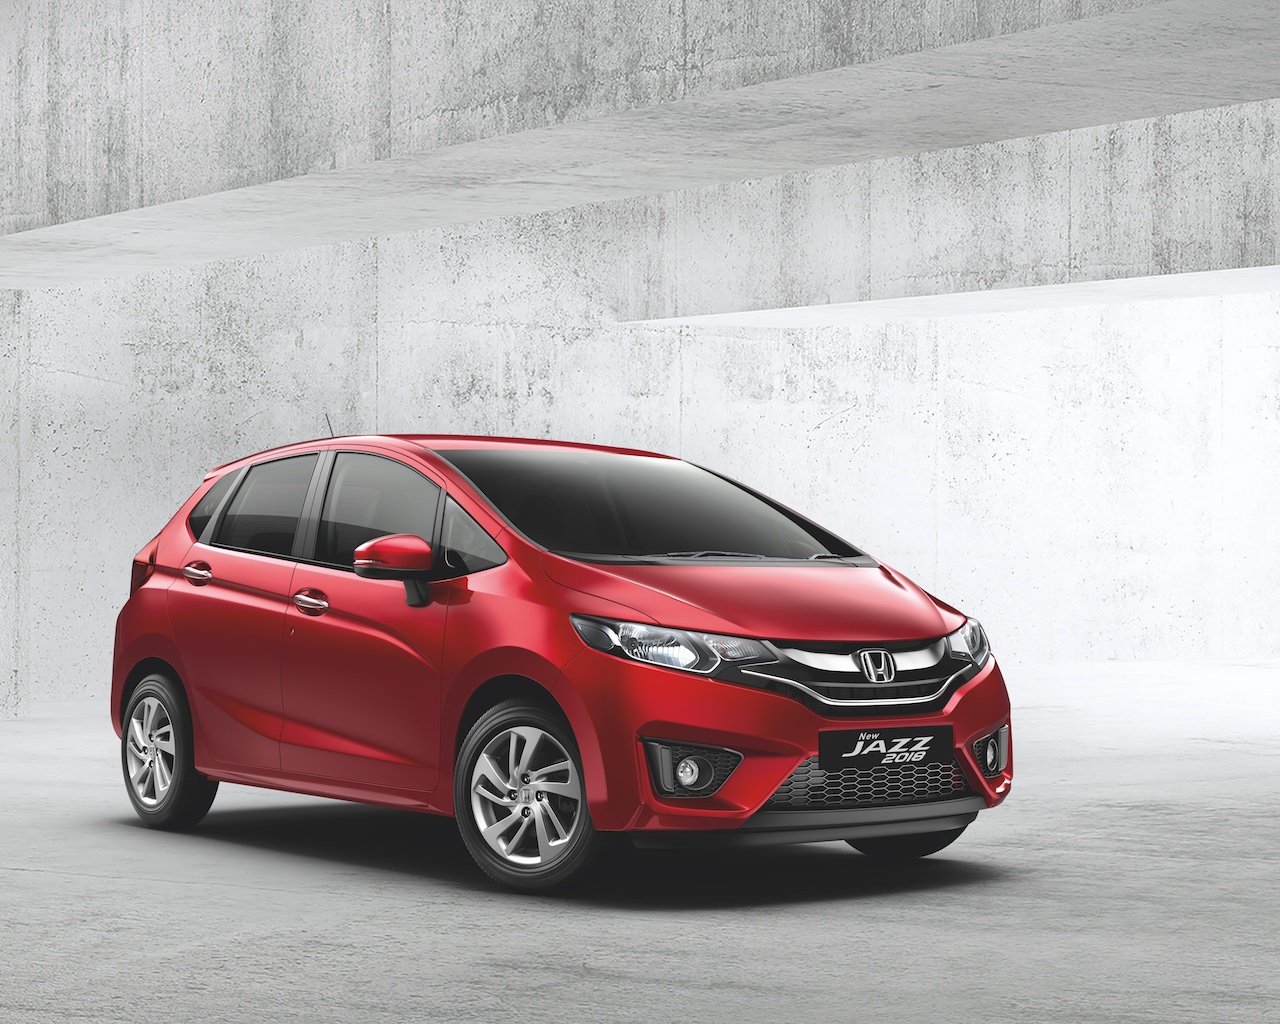 Honda Jazz Discontinued Temporarily, Updated Model Teased